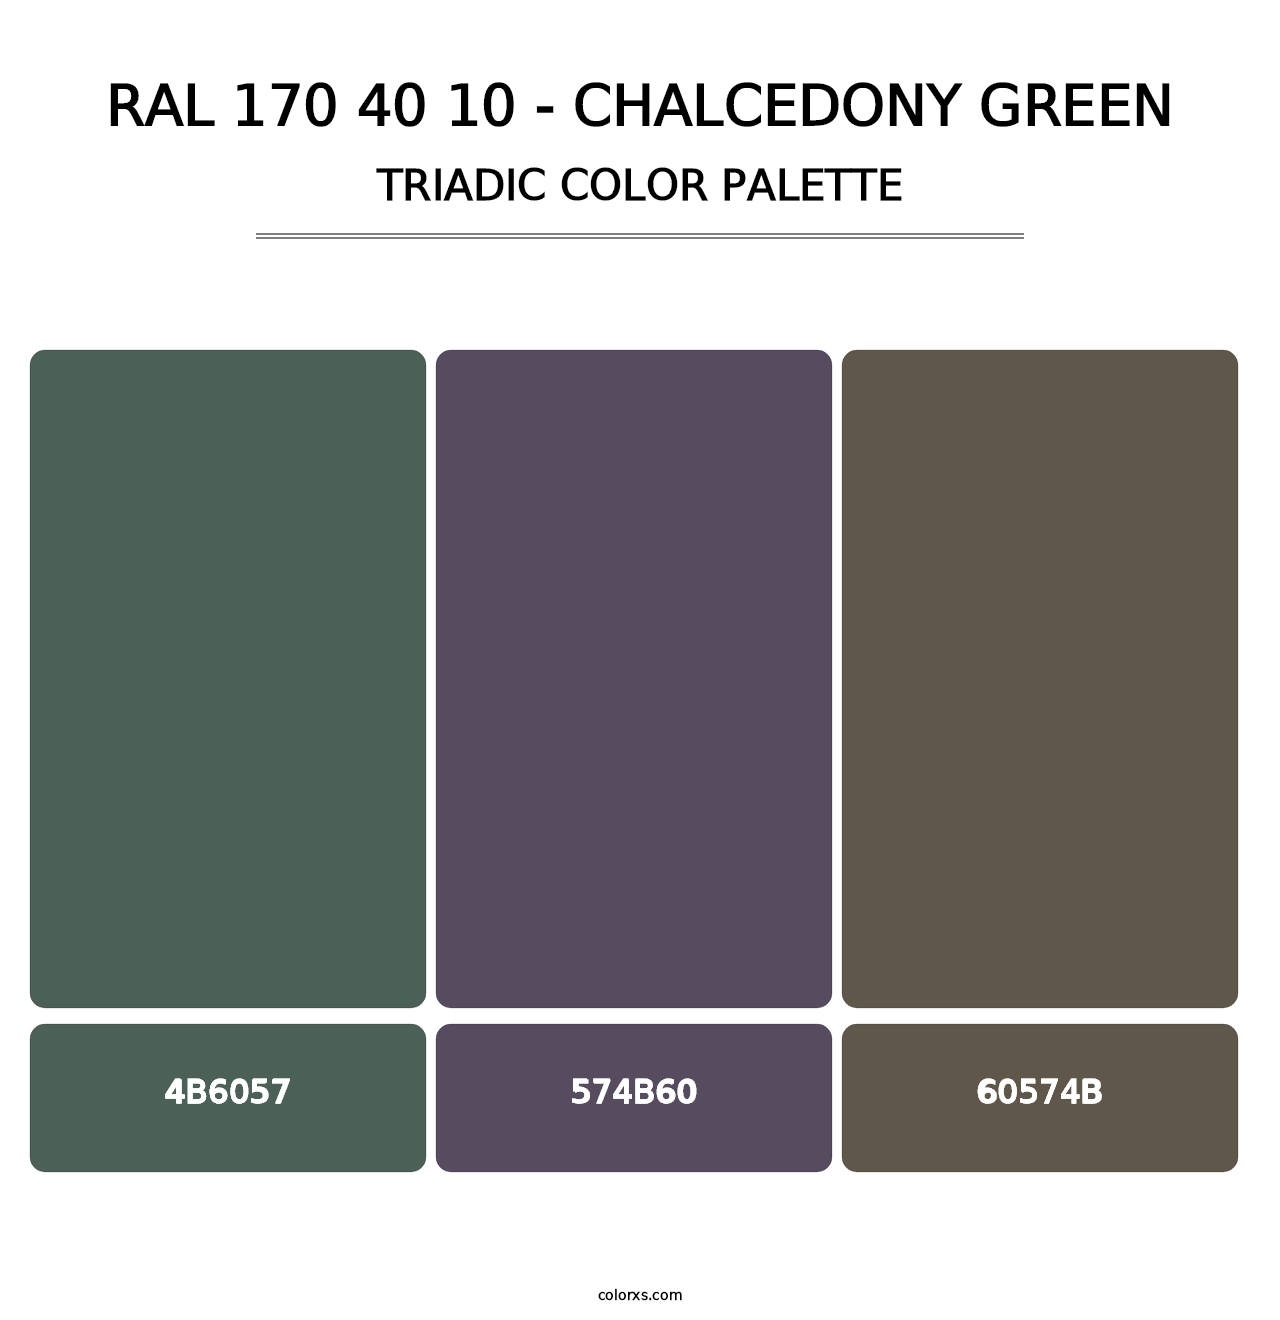 RAL 170 40 10 - Chalcedony Green - Triadic Color Palette